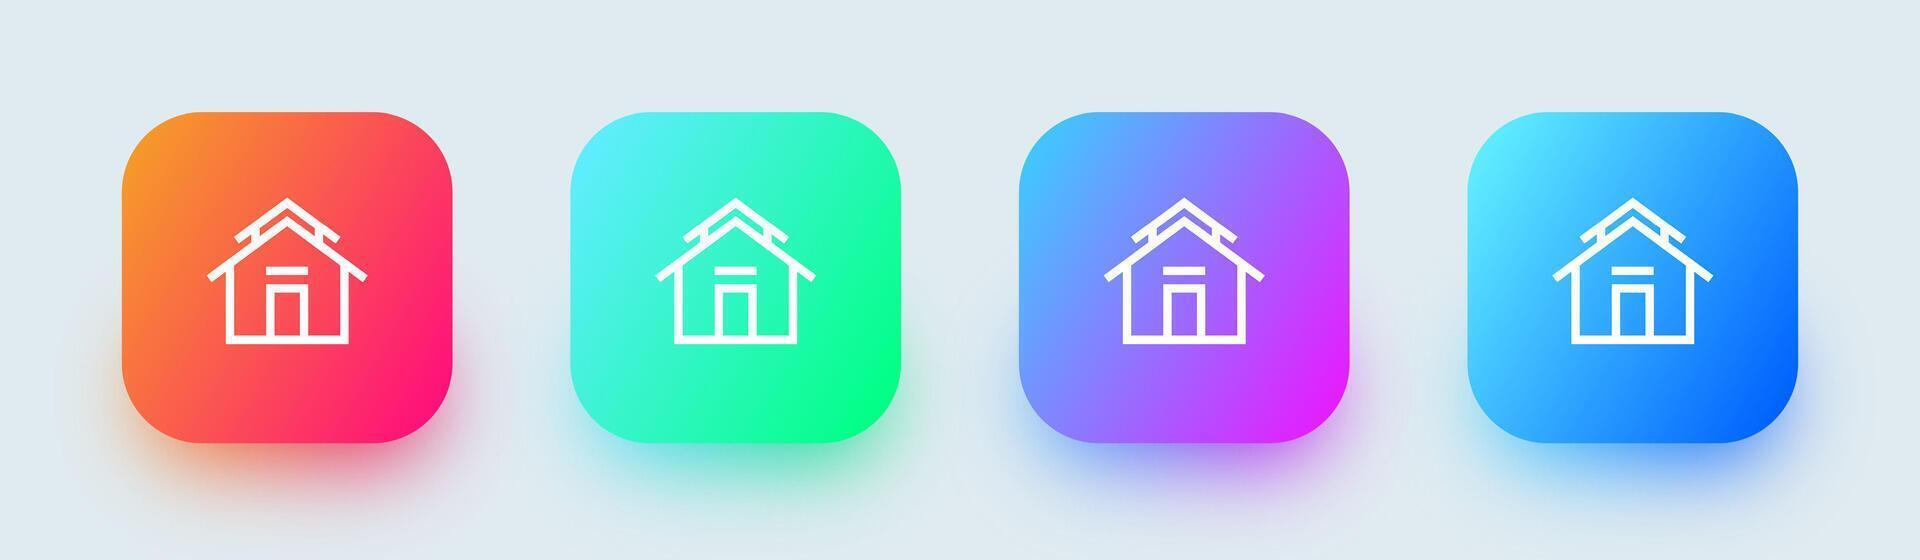 Home button line icon in square gradient colors. House signs vector illustration.